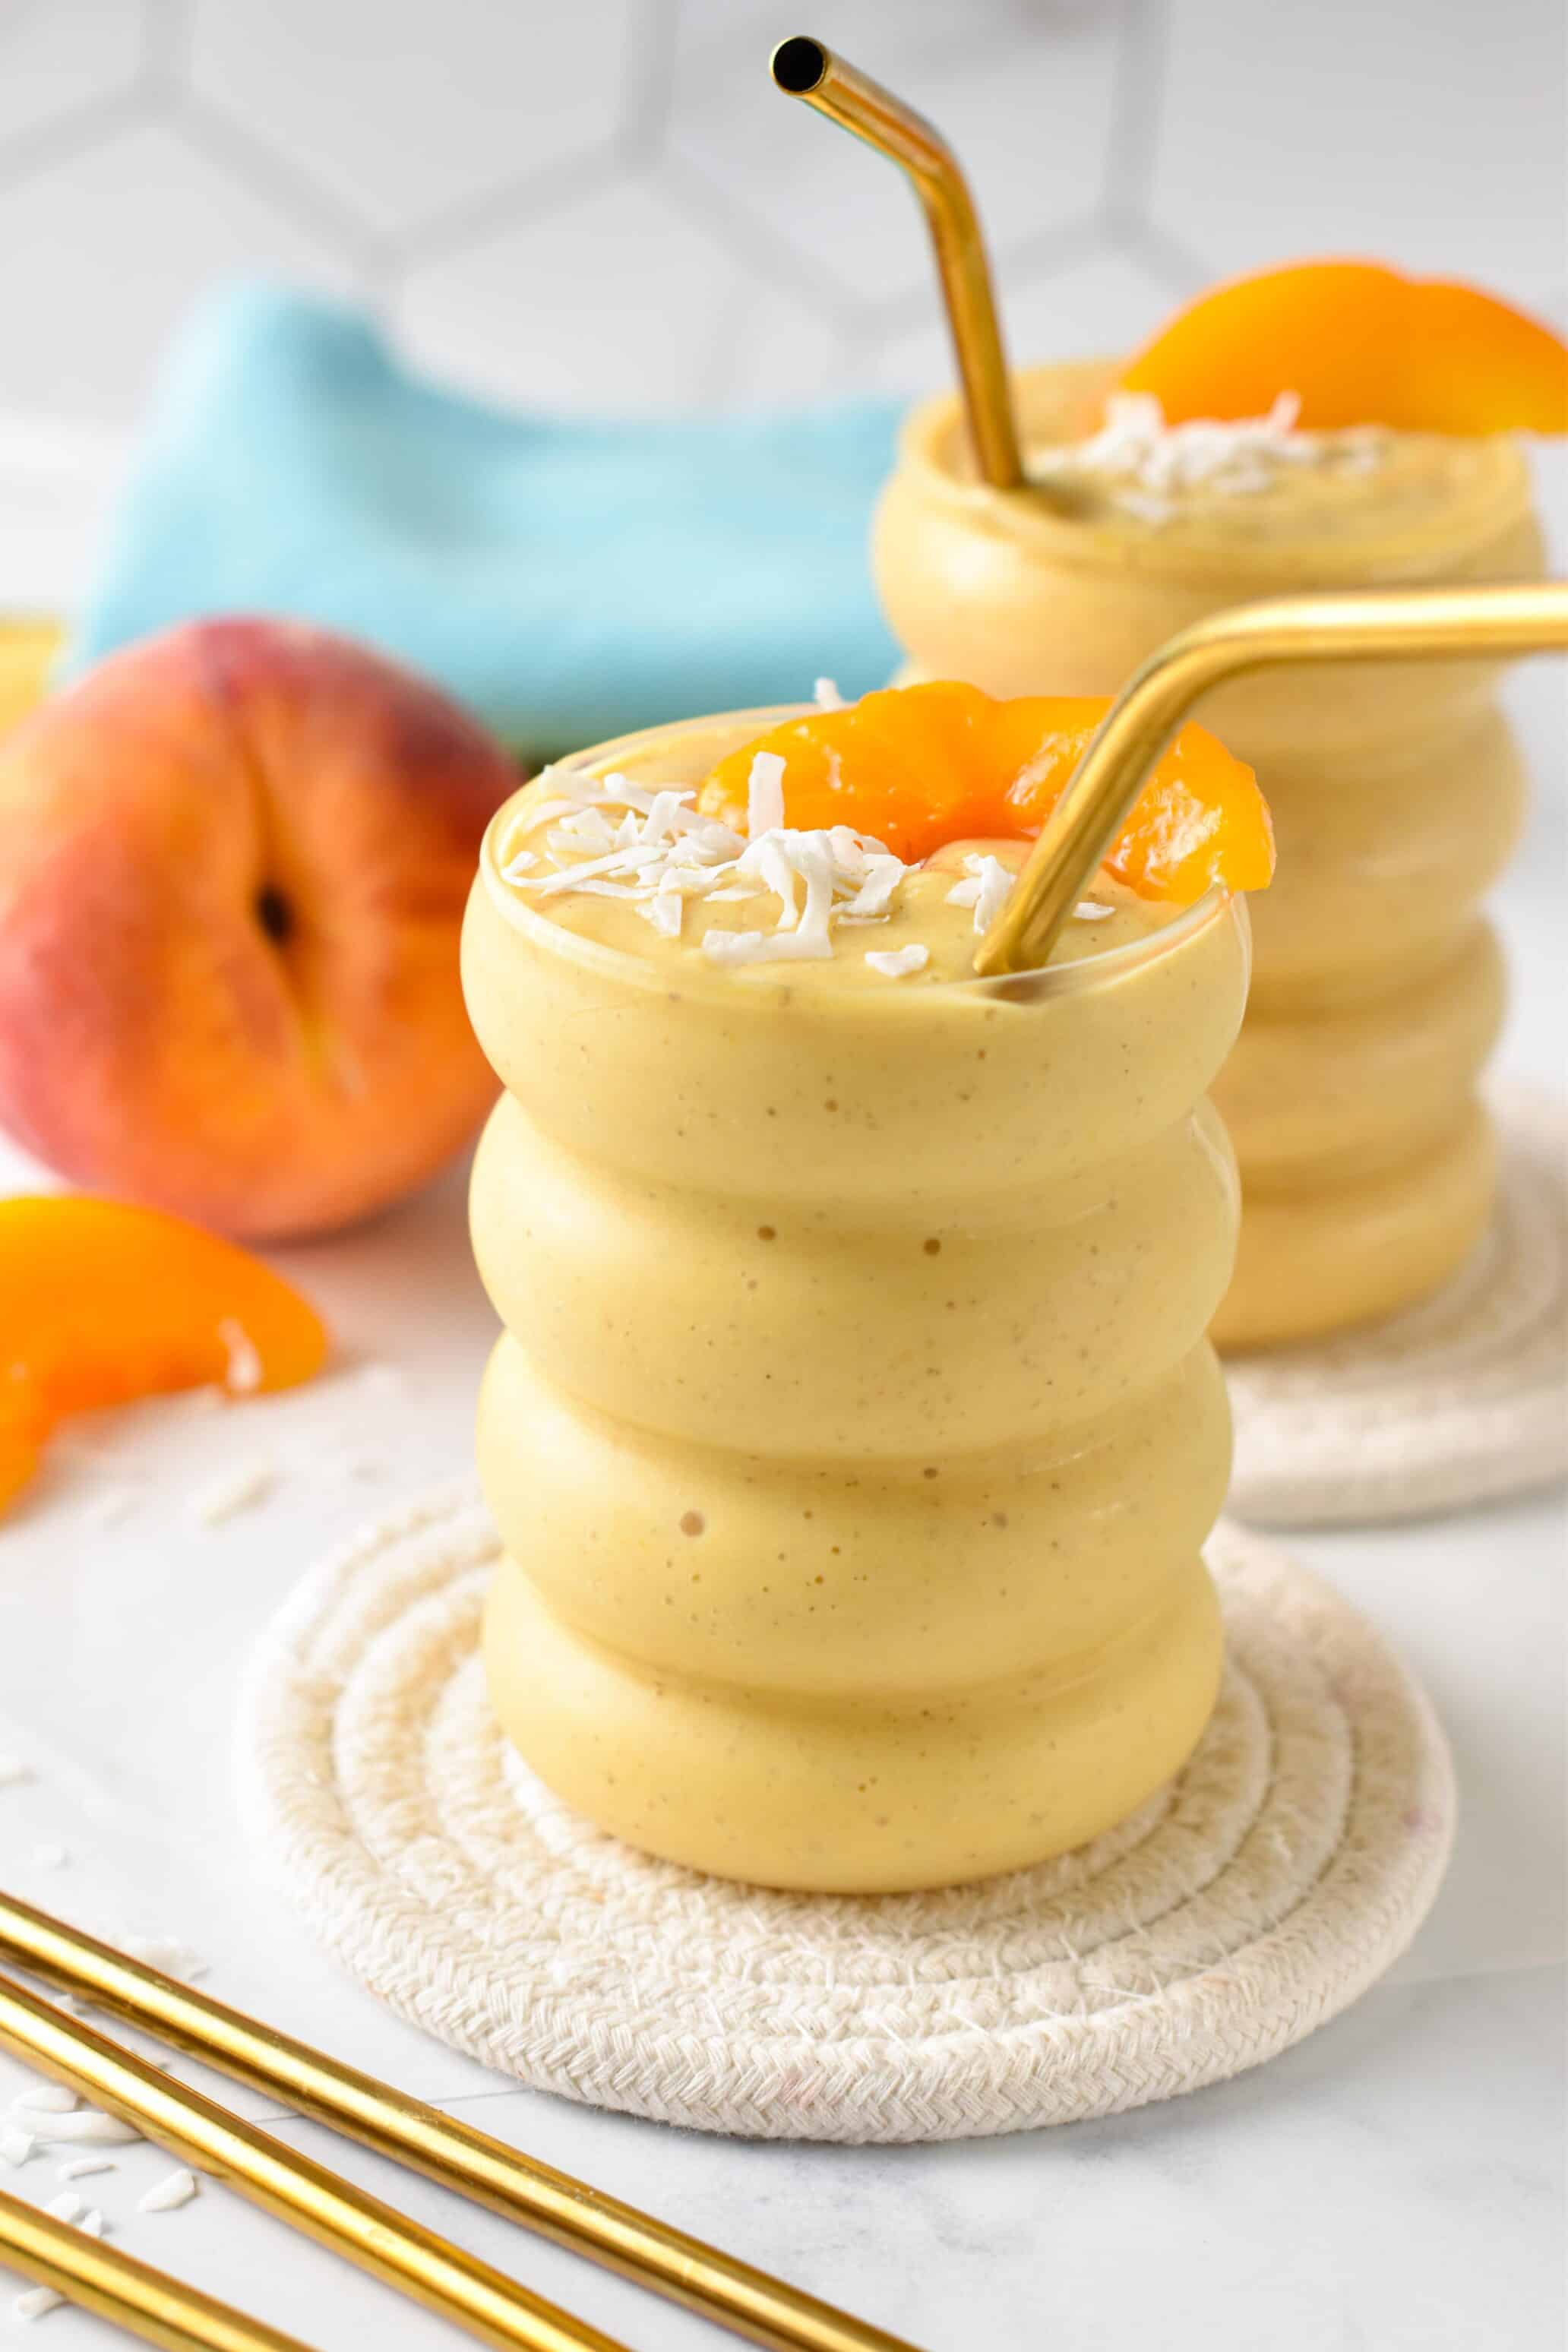 Banana Peach Smoothie served in a curved glass with a golden straw.